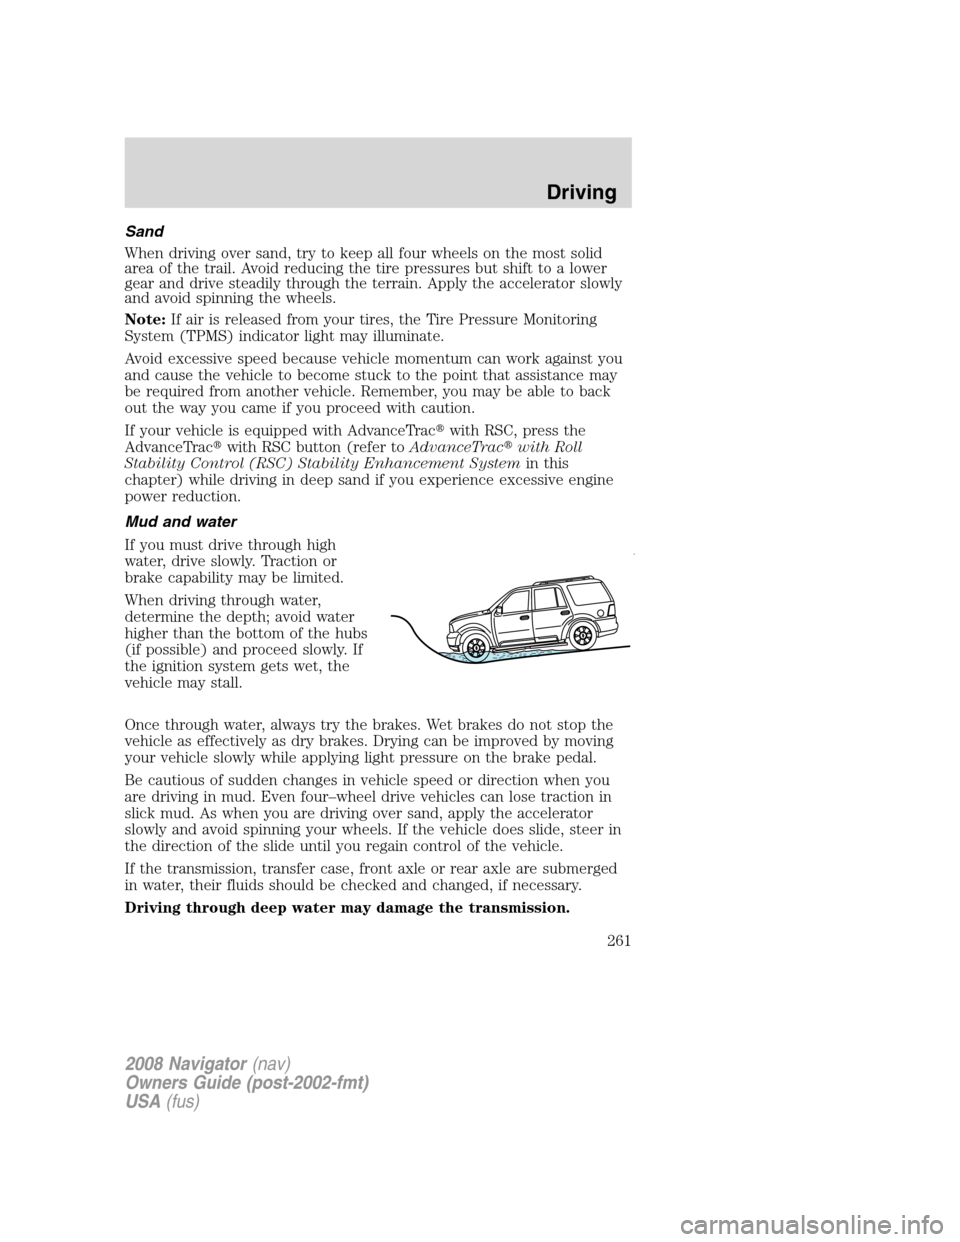 LINCOLN NAVIGATOR 2008 Service Manual Sand
When driving over sand, try to keep all four wheels on the most solid
area of the trail. Avoid reducing the tire pressures but shift to a lower
gear and drive steadily through the terrain. Apply 